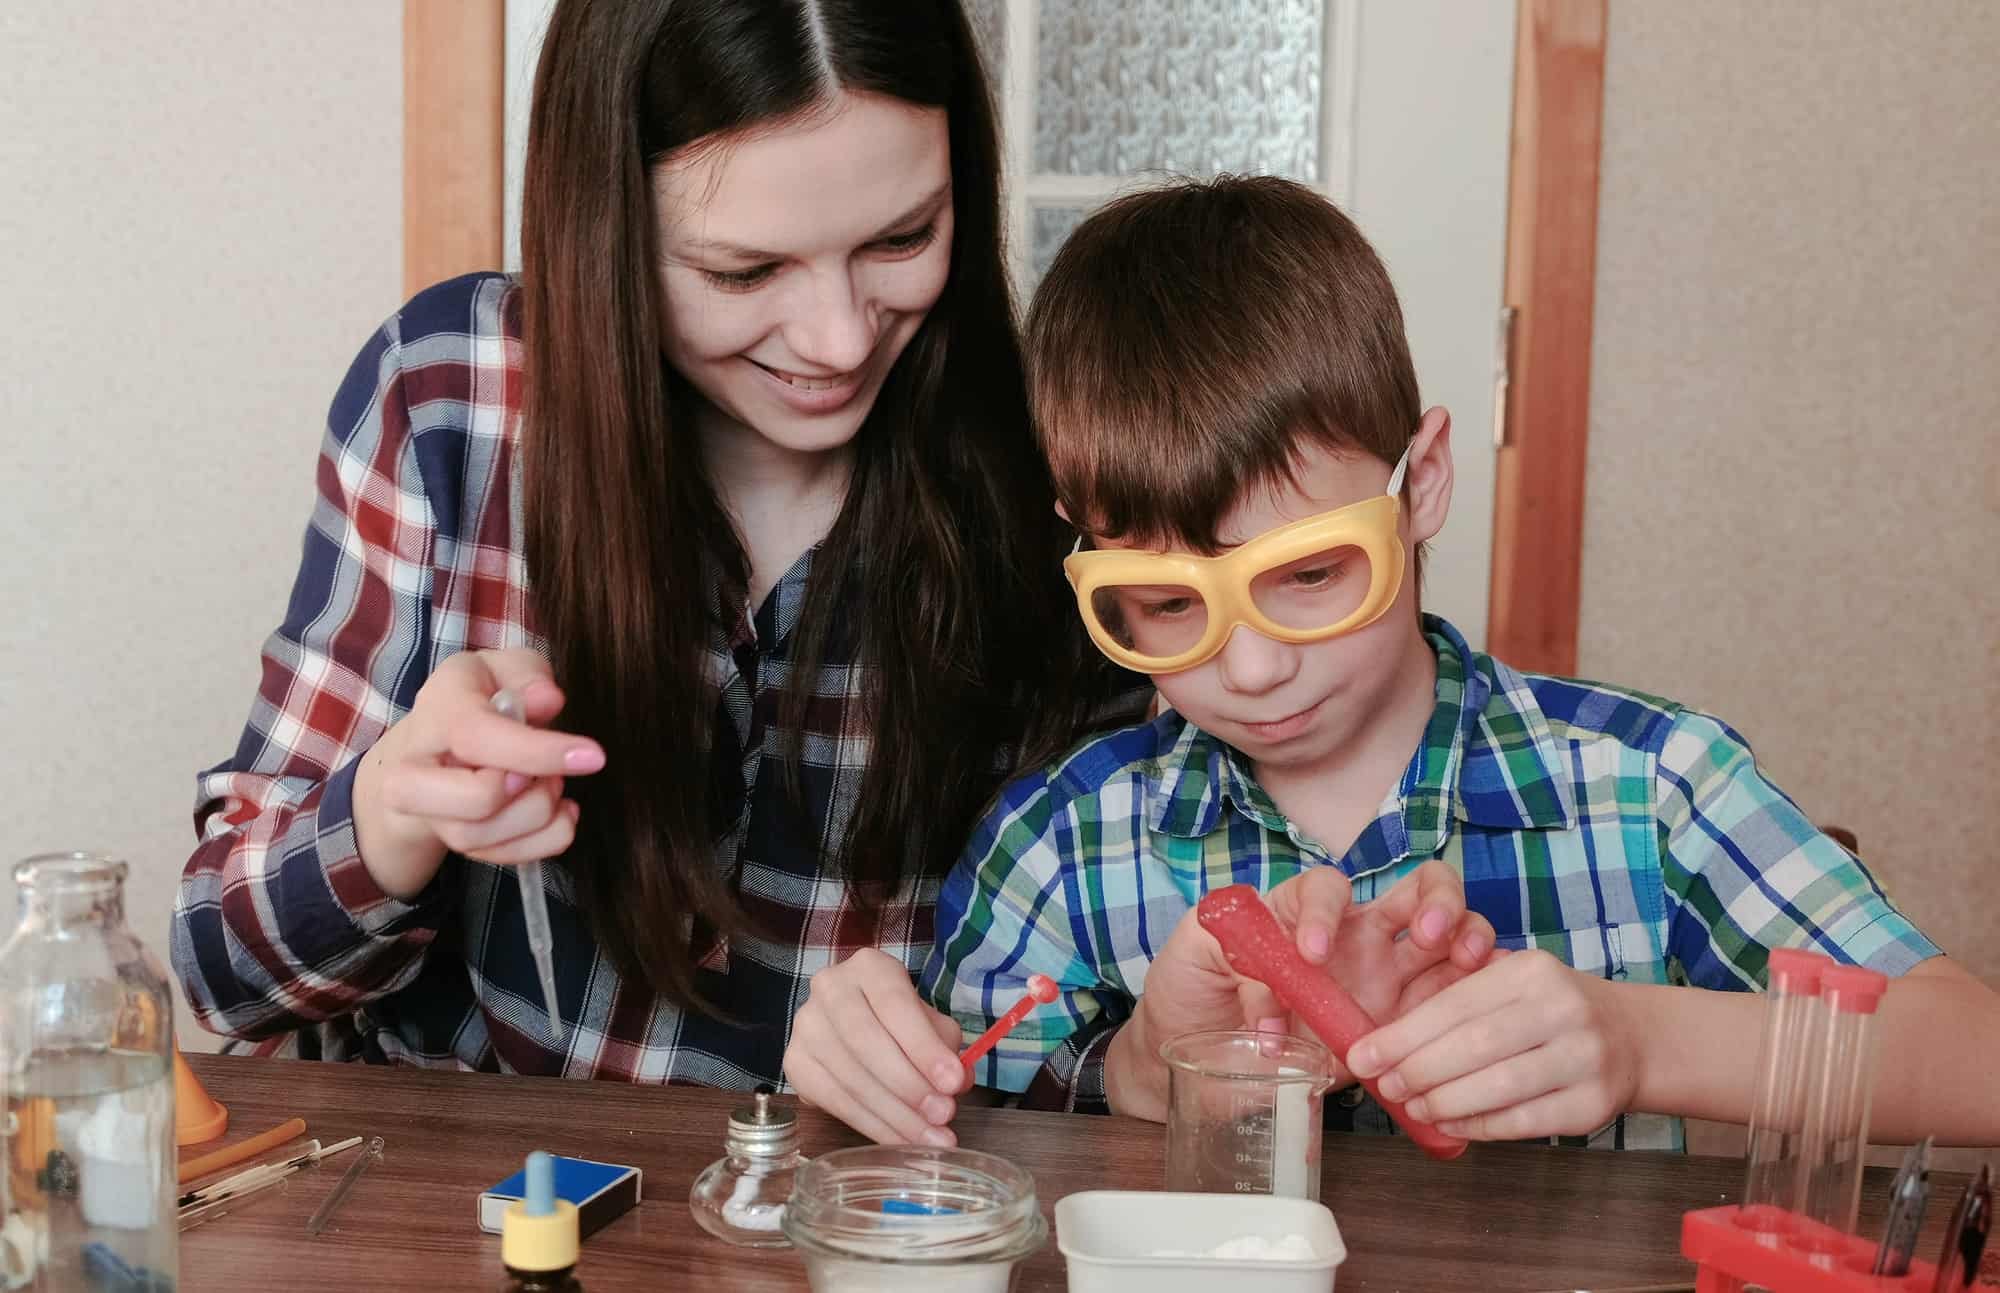 STEM activities are hugely important for kids' learning. Grab our list of 10 fabulous STEM gift ideas for kids to encourage learning and fun at Made in a Pinch. For more helpful tips and delicious recipes, follow us on Pinterest!